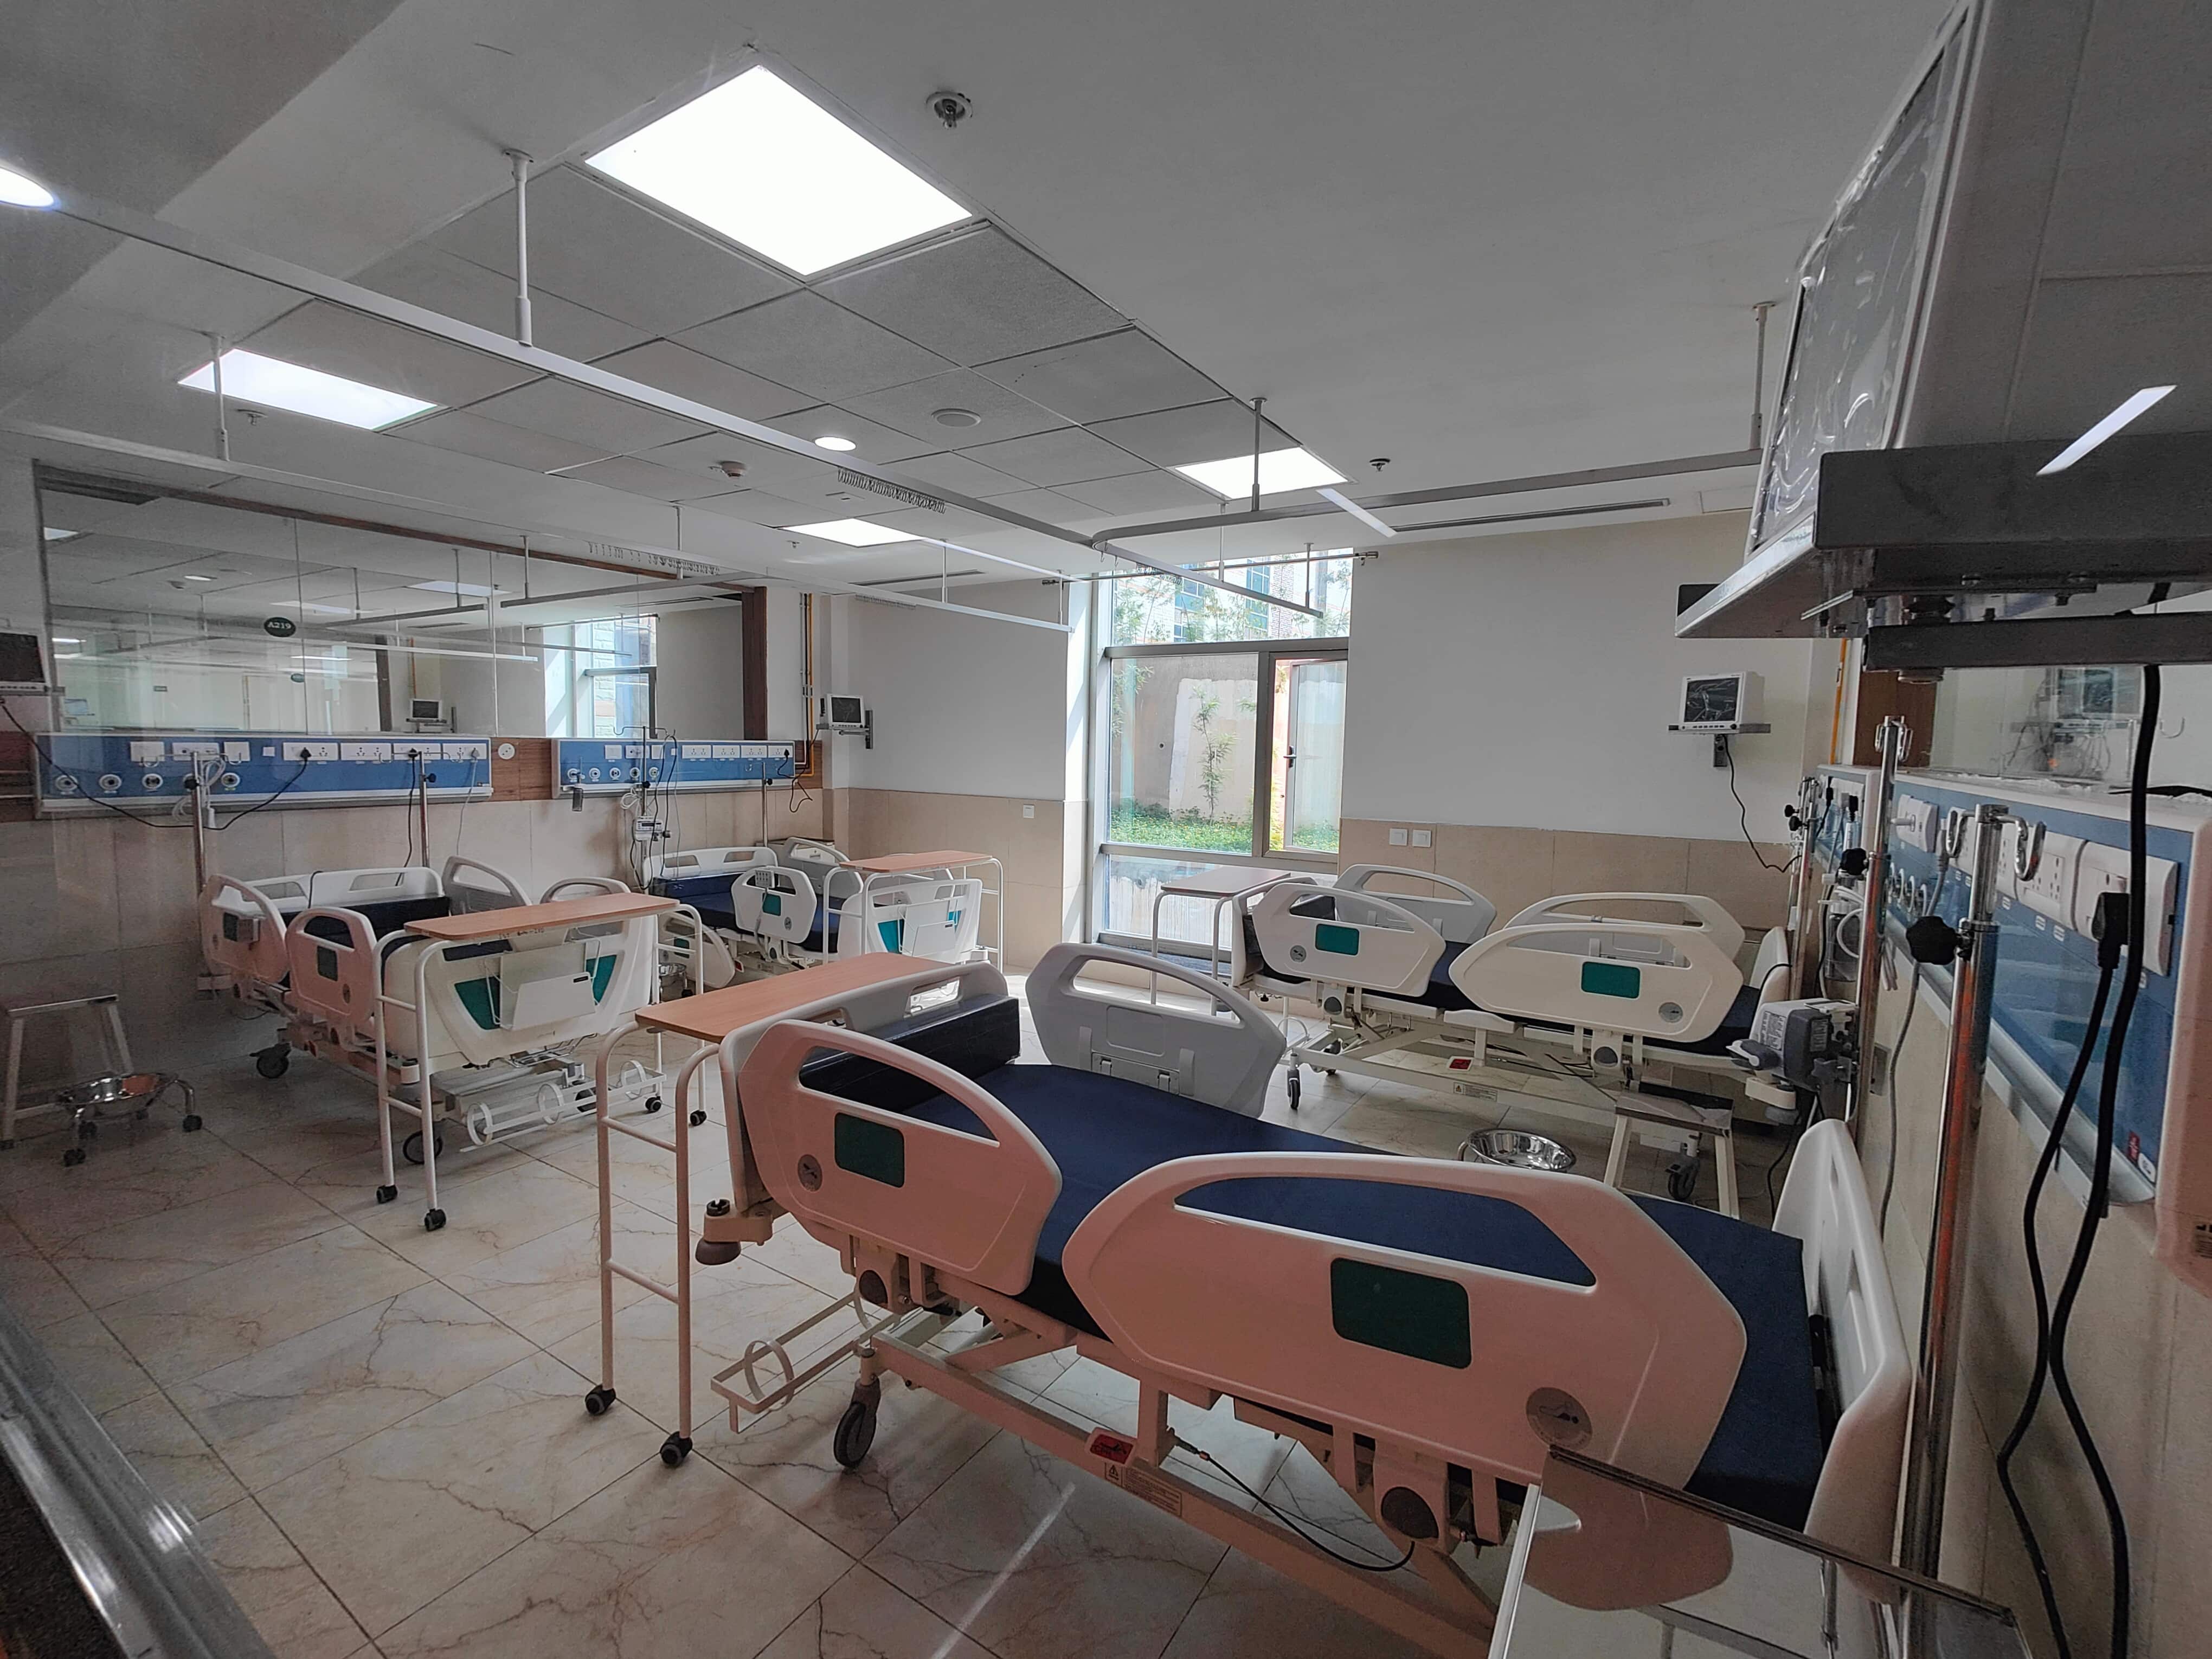 Hospital is equipped with 24-hour emergency and dialysis facilities